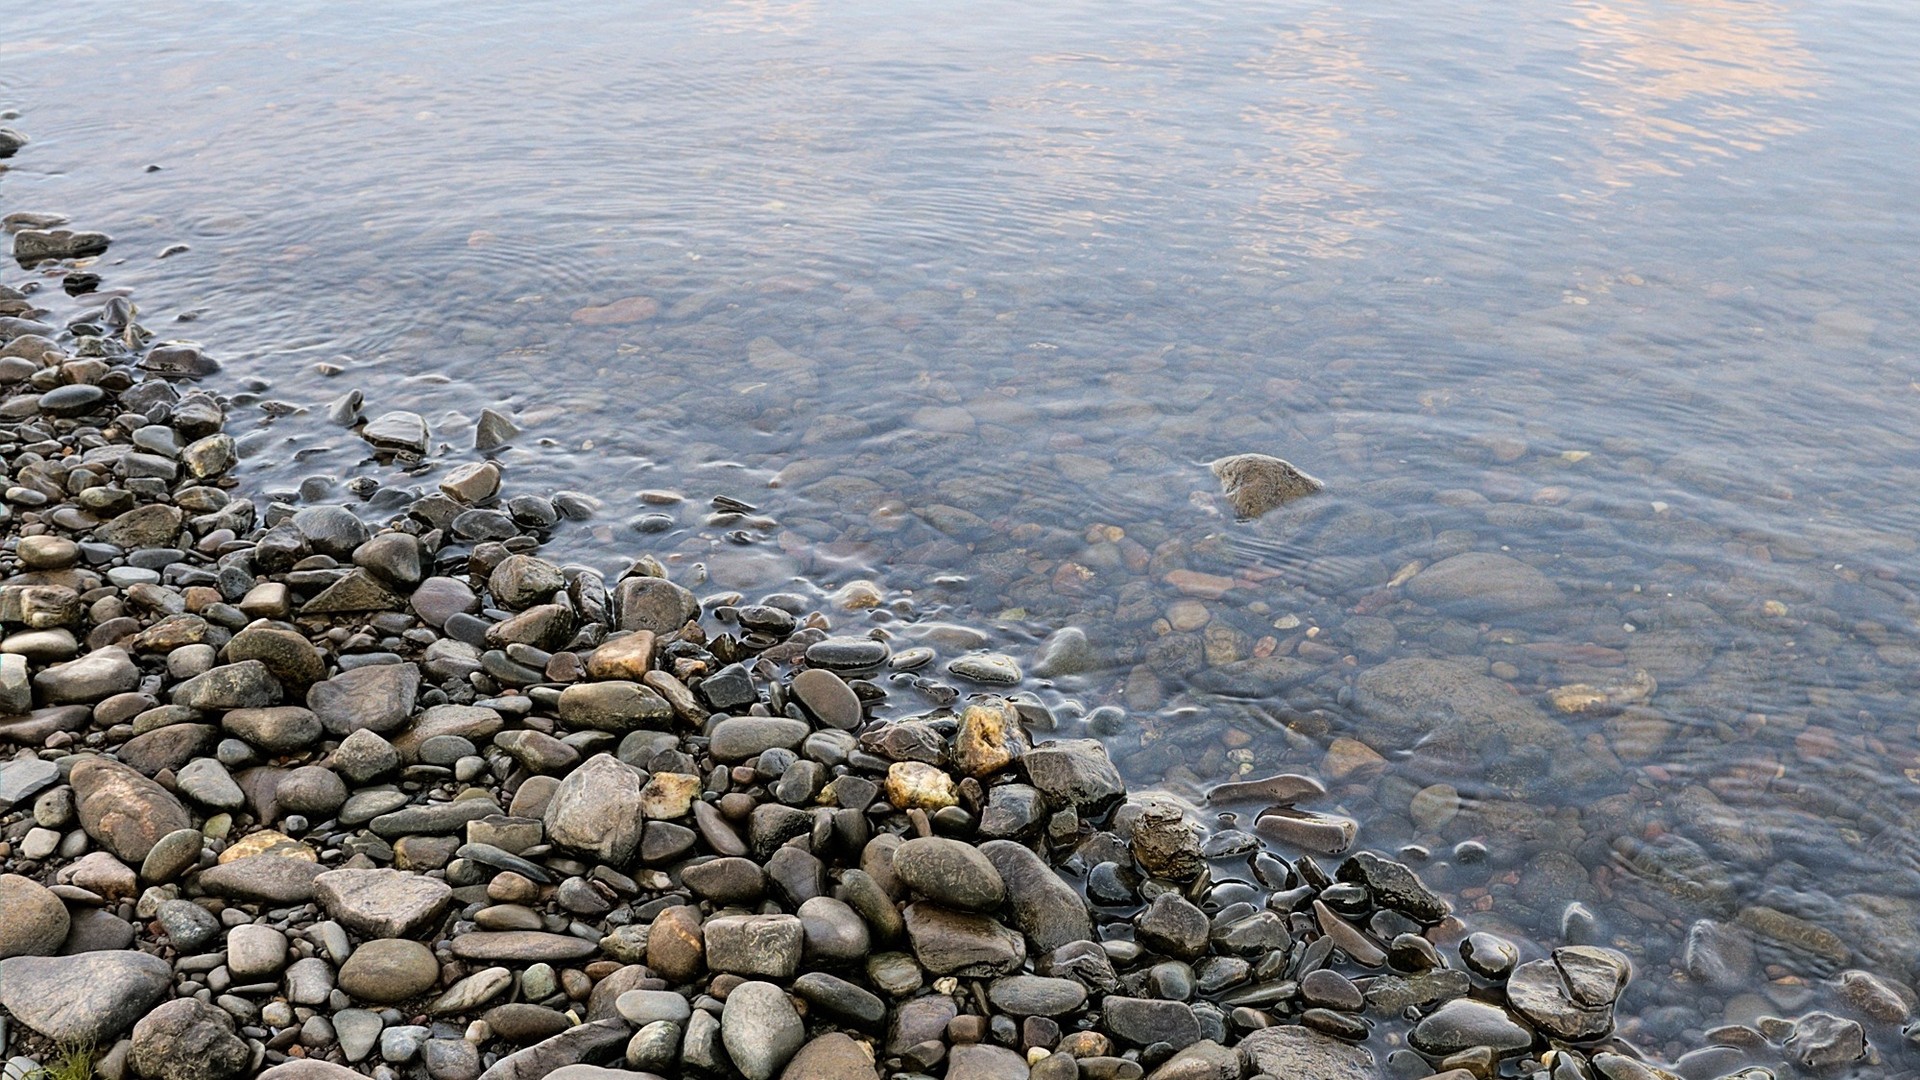 1920x1080 wallpapers: stones, pebbles, water, shore, humidity, transparent (image)